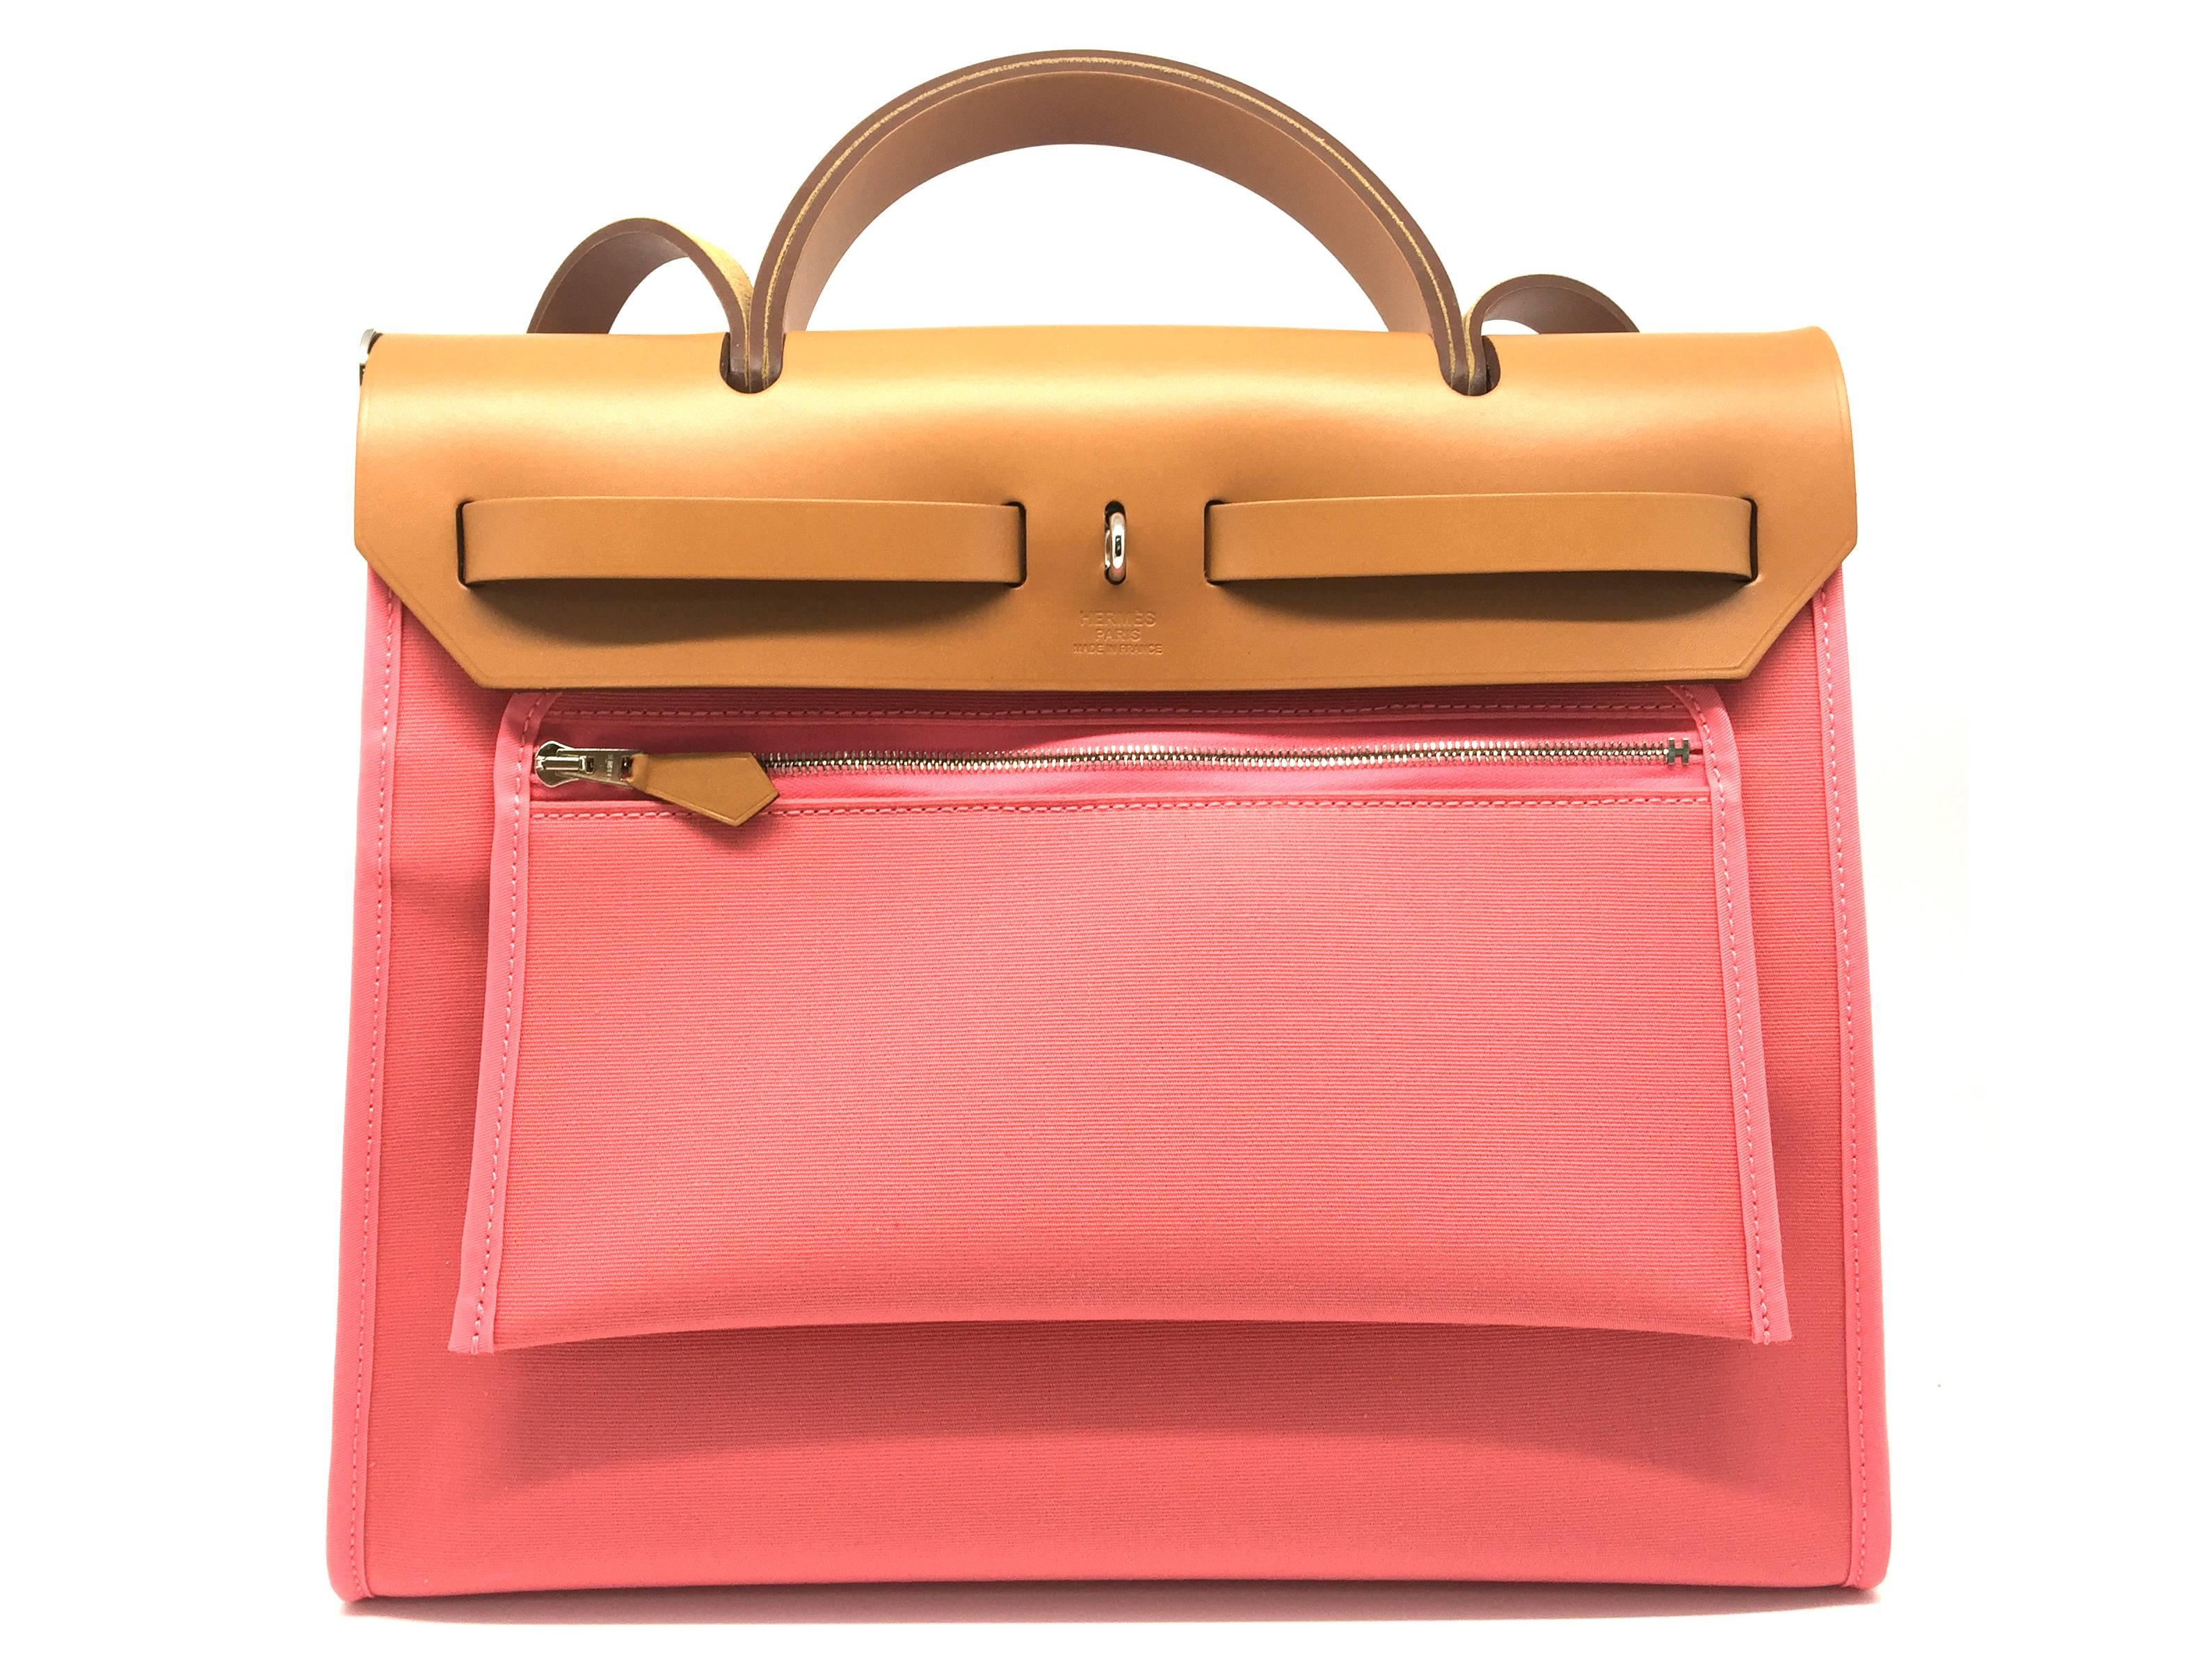 Color: Pink / Rose Azalee (designer color) 

Material: Canvas 

Condition: Rank N 
Overall: Brand new
Surface: Good
Corners: Good
Edges: Good
Handles/Straps: Good
Hardware: Good

Dimension: W31 × H25 × D10cm（W12.2" × H9.8" ×